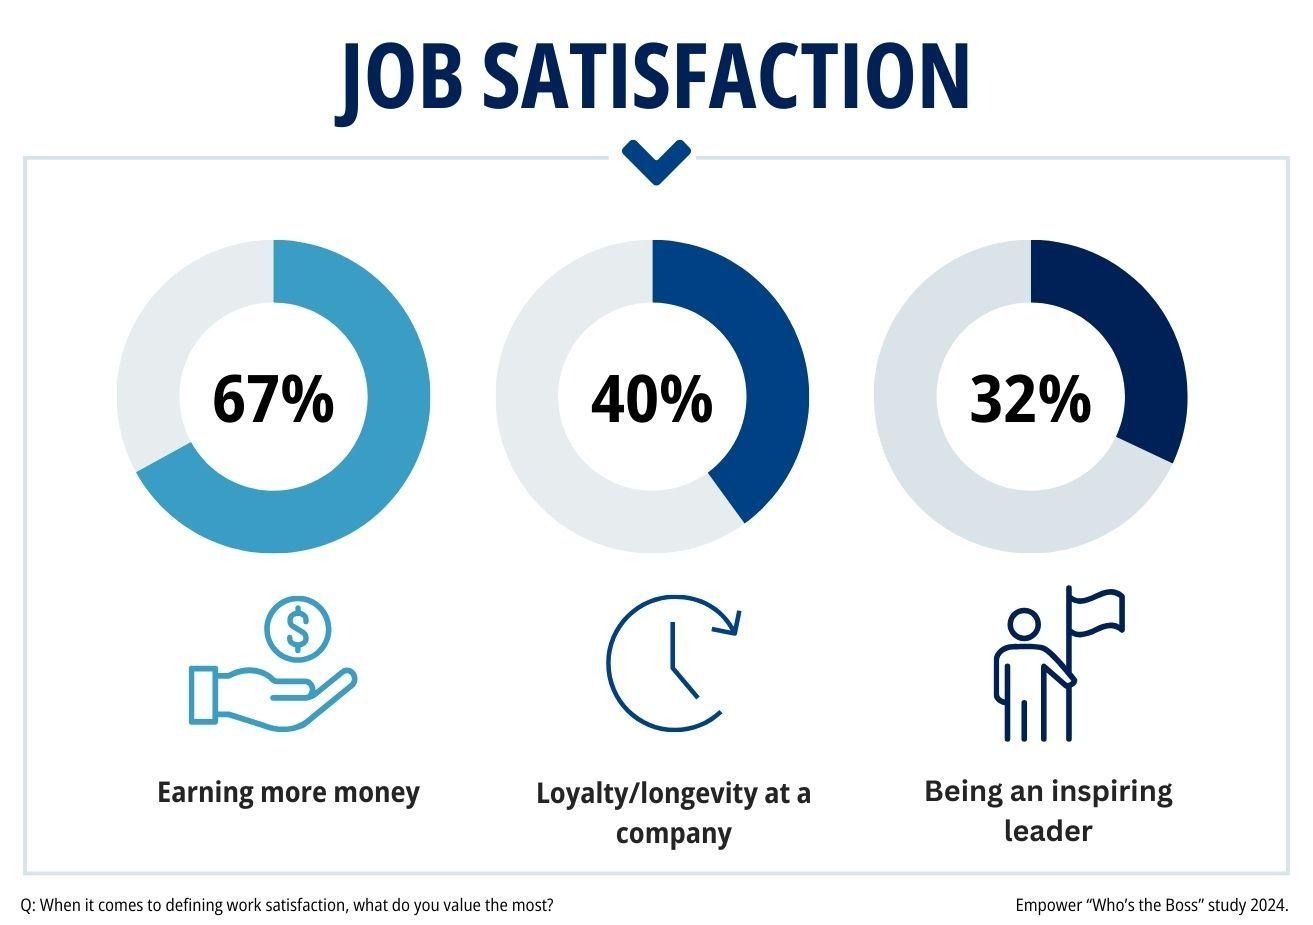 Job satisfaction survey results for the question "When it comes to work satisfaction, what do you value the most?" Money (67%), loyalty at a company (40%), an inspiring leader (32%). 